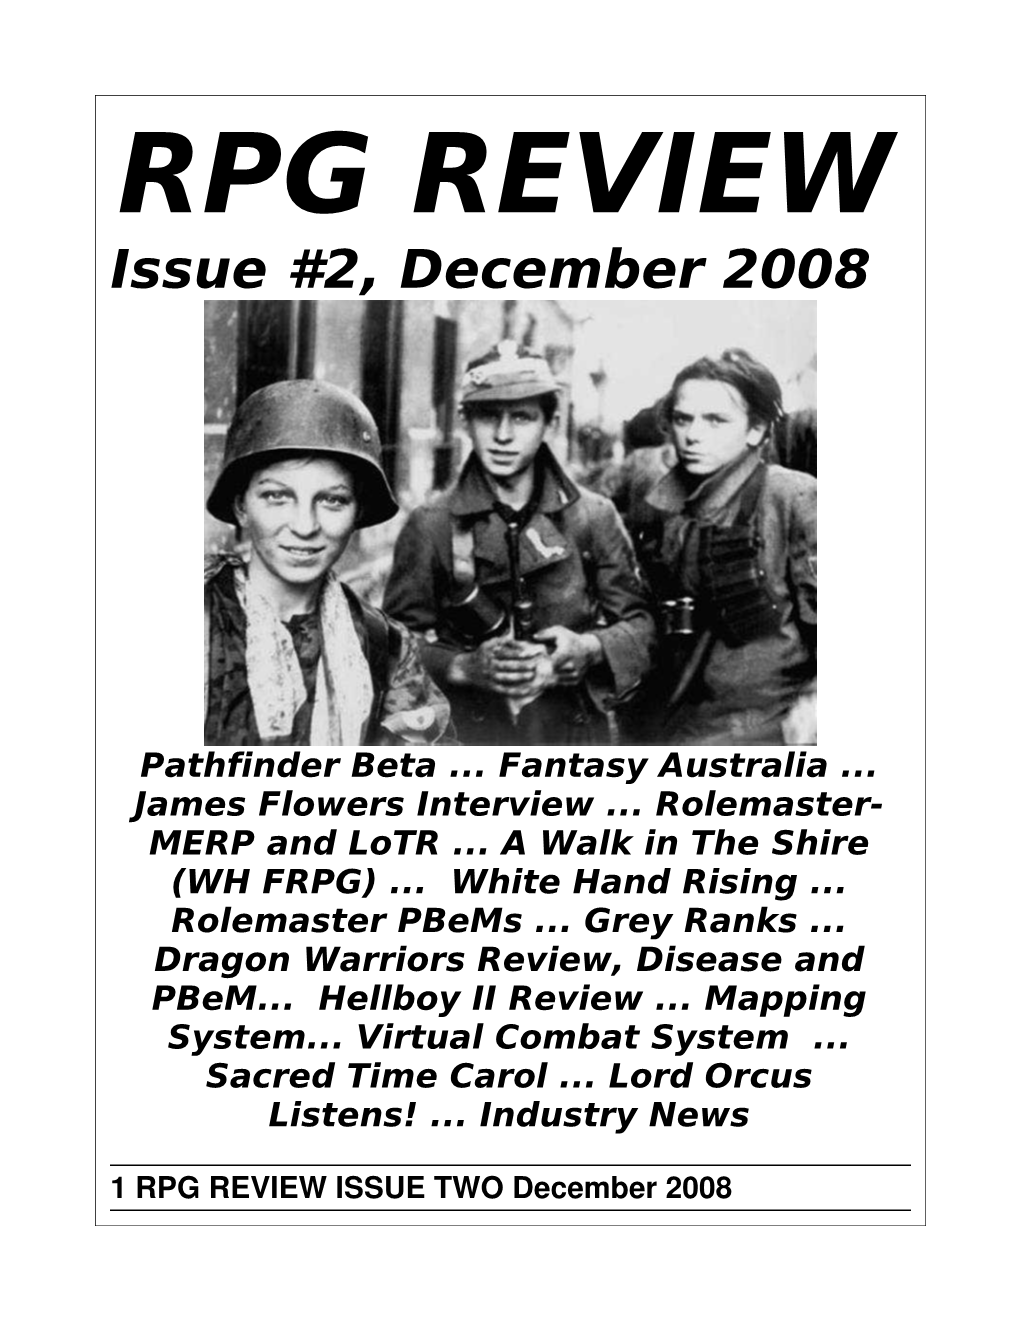 RPG REVIEW Issue #2, December 2008